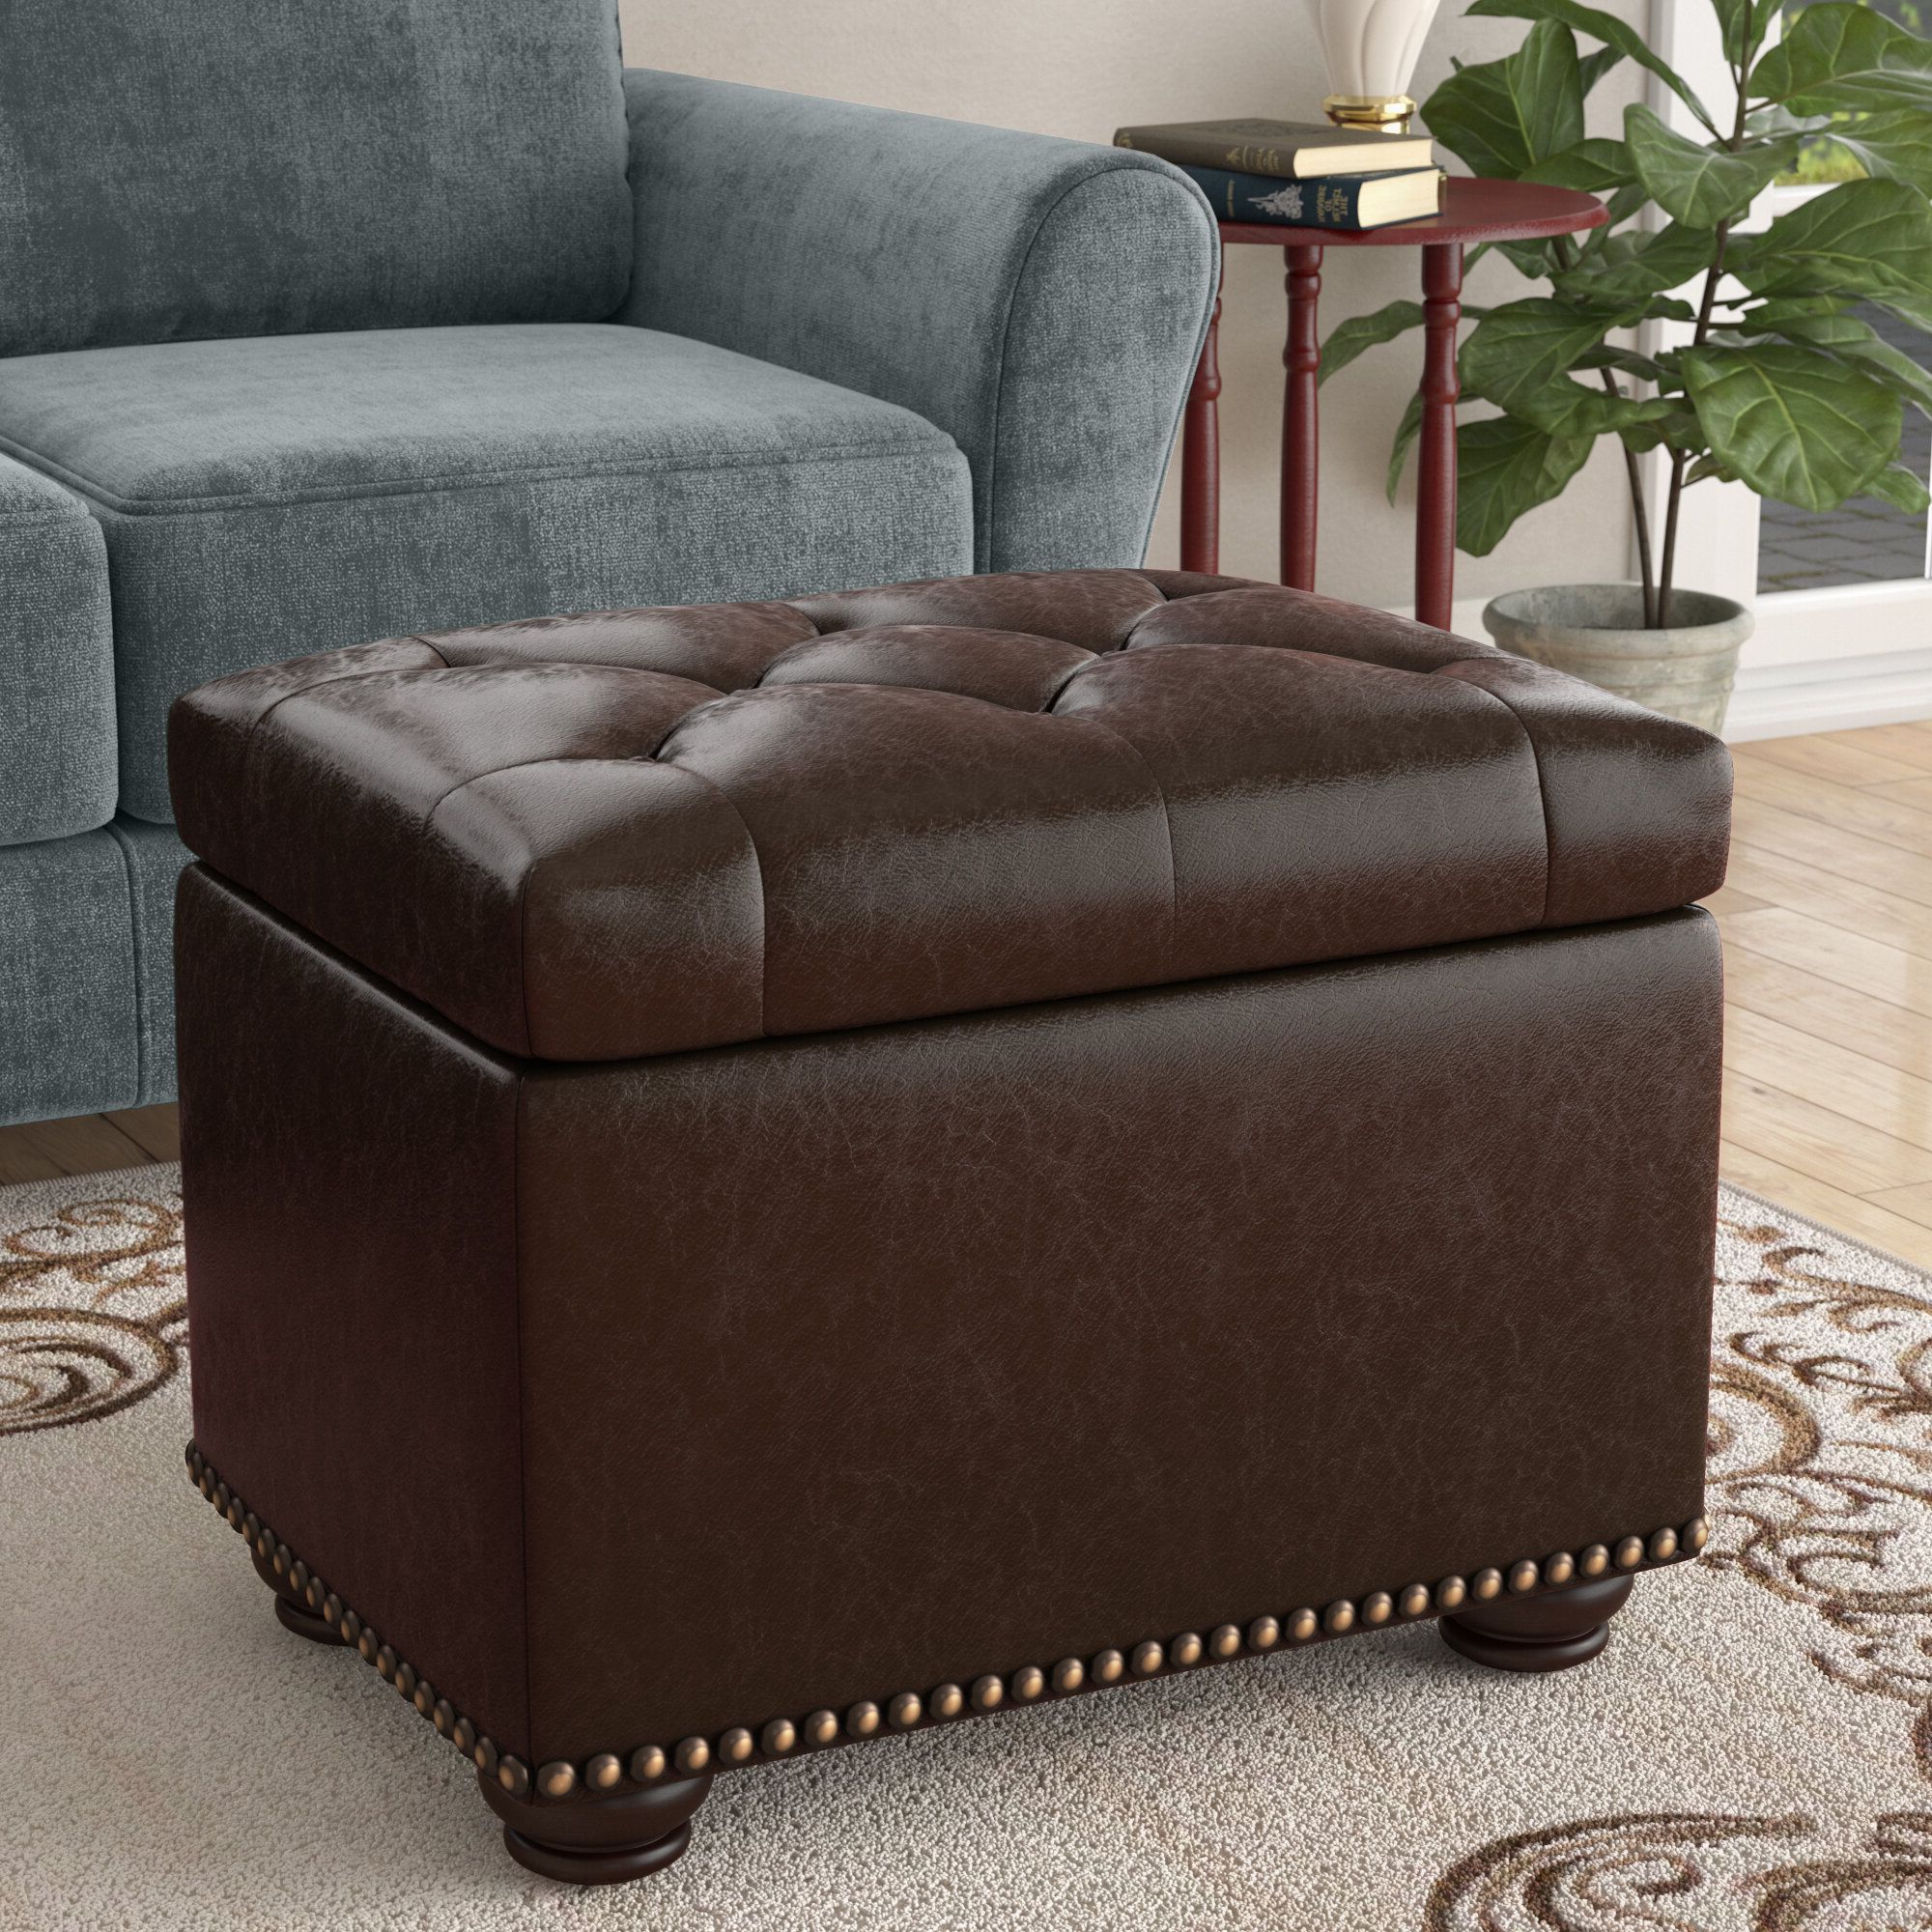 Brown Leather Round Pouf Ottomans Within Current Boston Espresso Brown Tufted Leather Storage Ottoman Coffee Table (View 9 of 10)